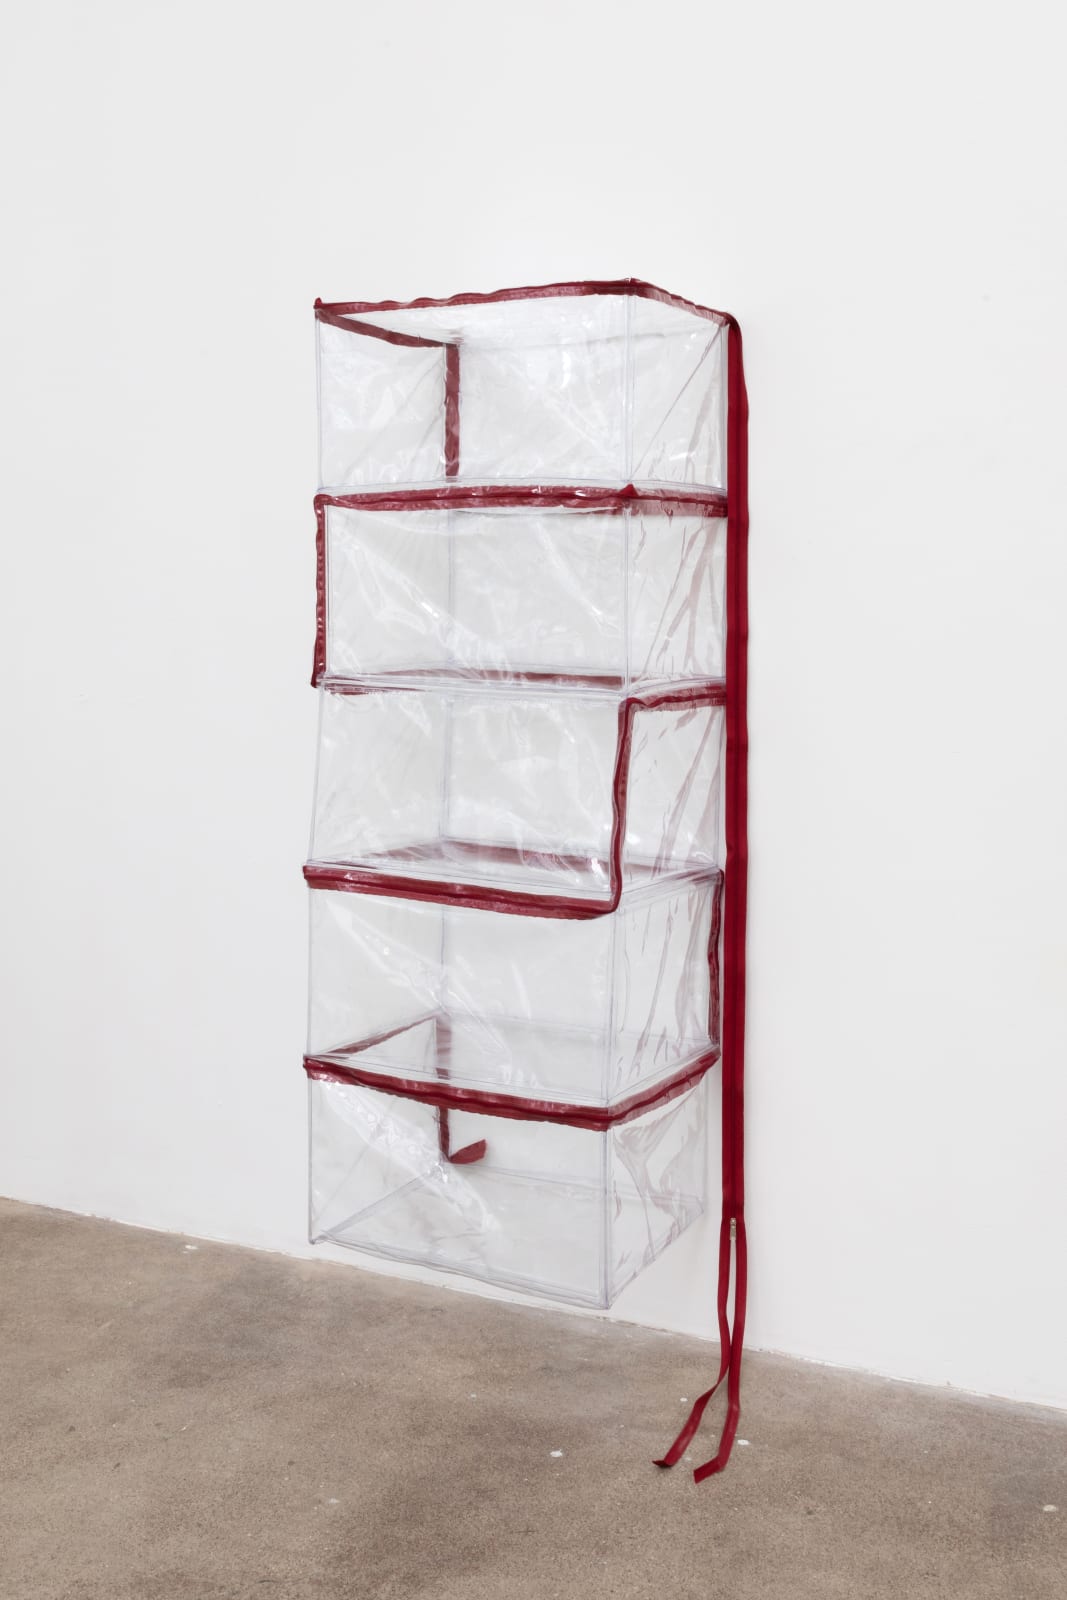 Alina Tenser, Container for Utterance, vacant, wine, 2022